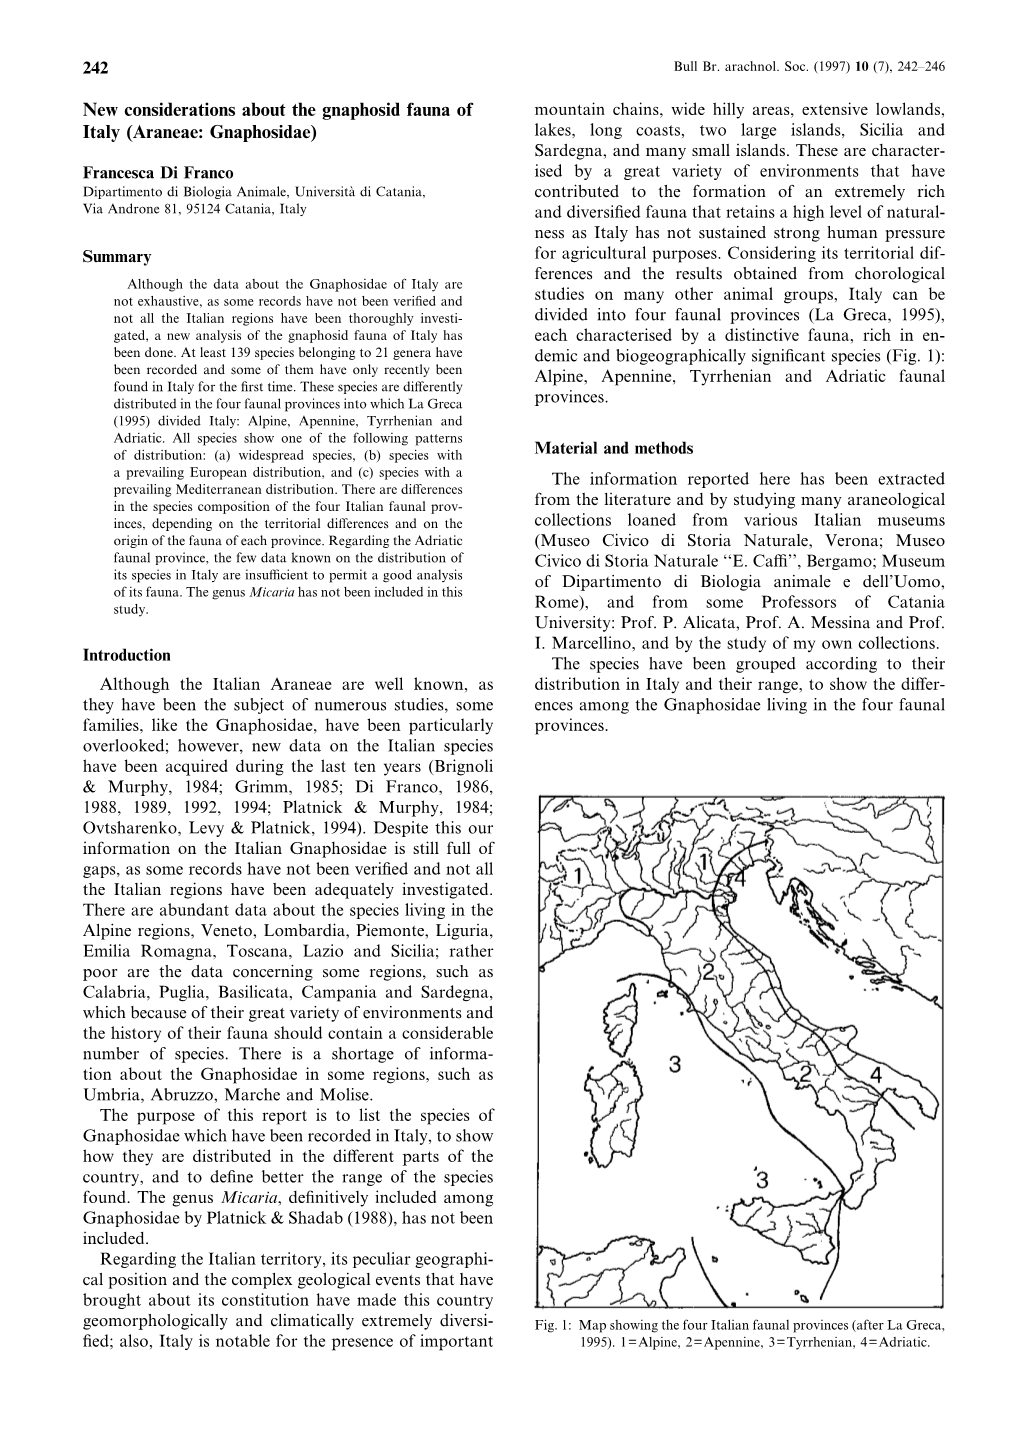 New Considerations About the Gnaphosid Fauna of Italy